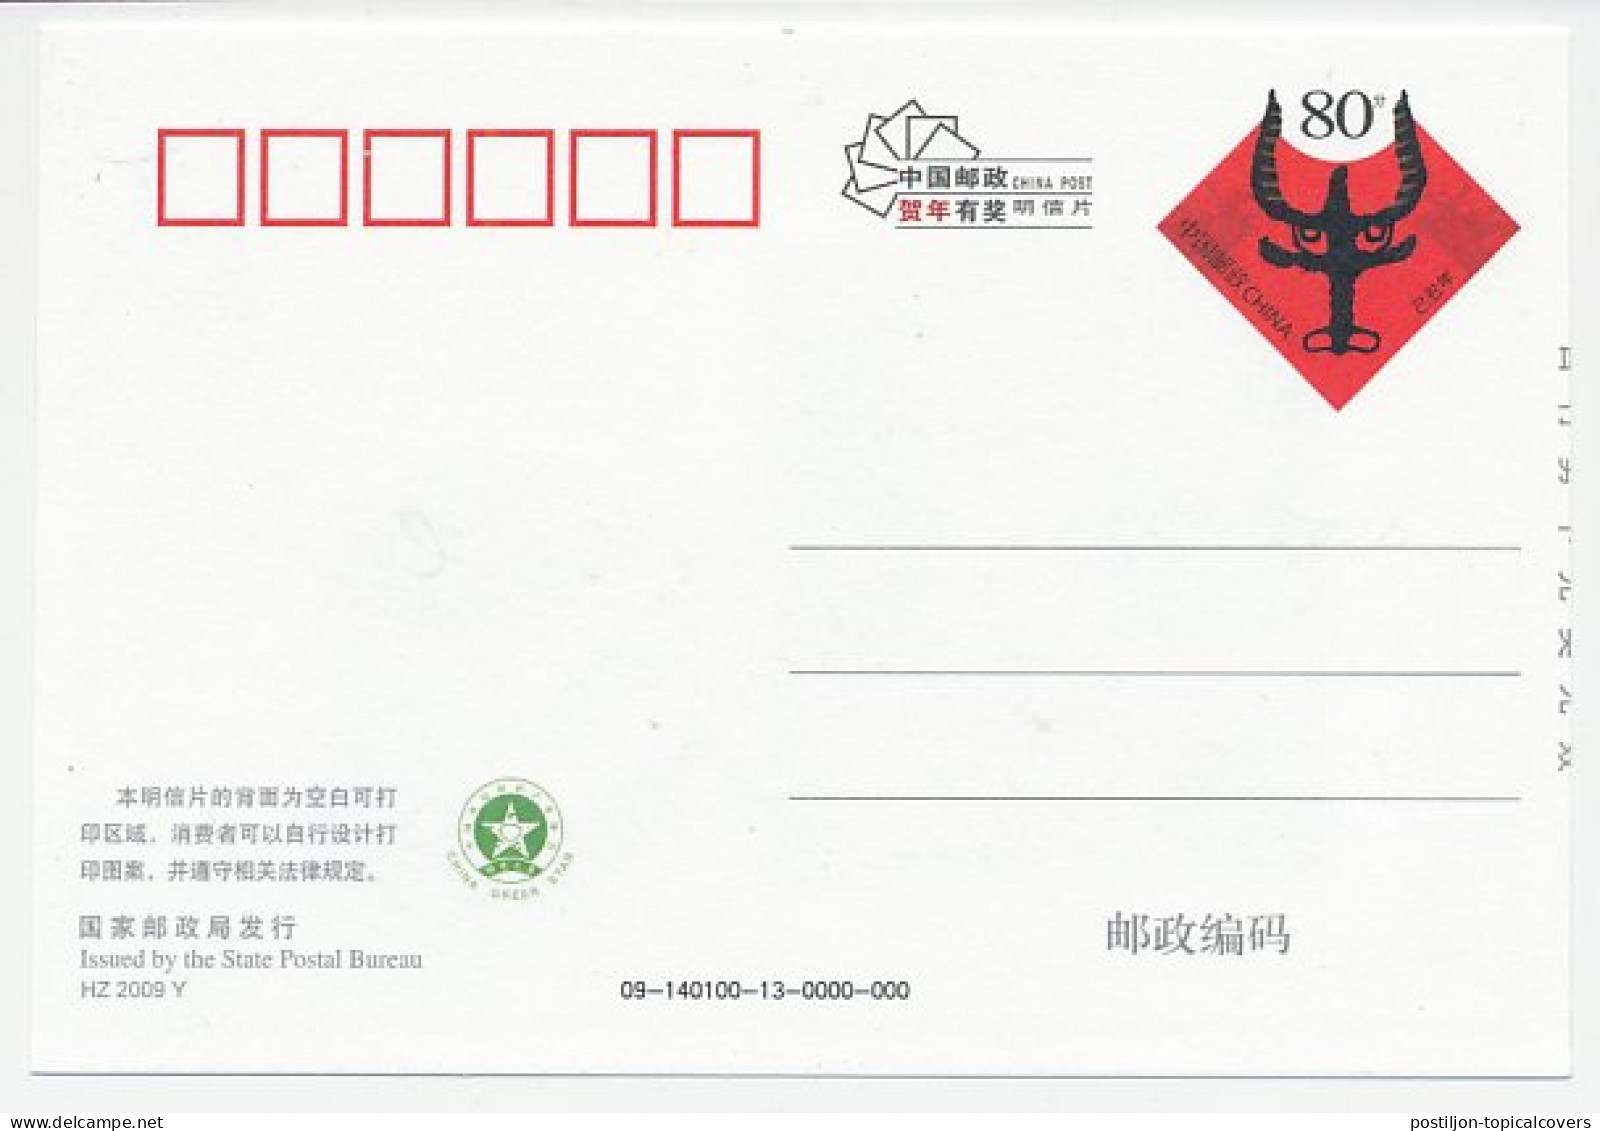 Postal Stationery China 2009 Hans Christian Andersen - The Tinder Box - Fairy Tales, Popular Stories & Legends